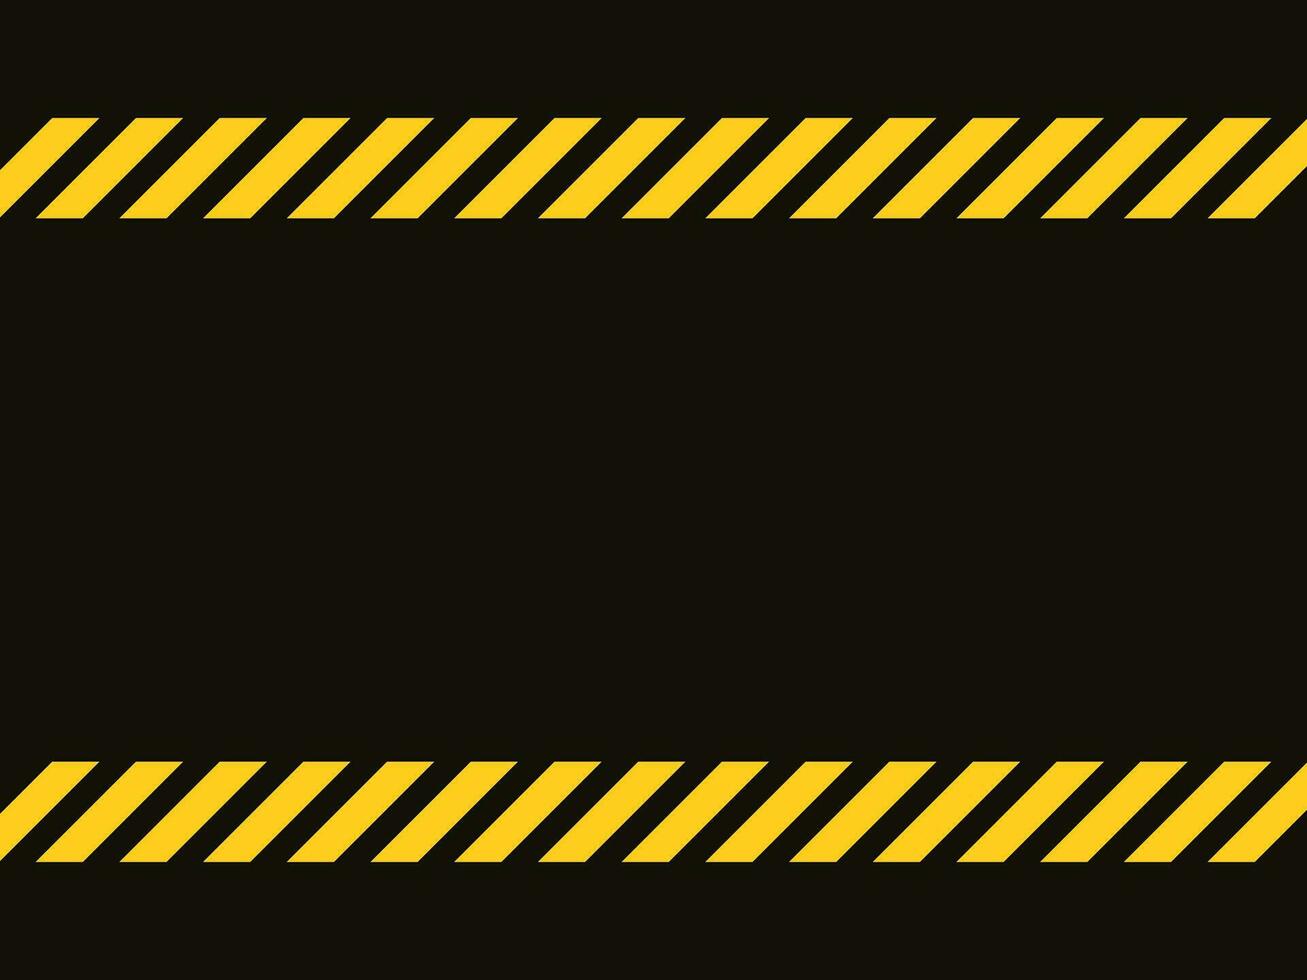 Black and yellow line striped background.Caution tape.Blank warning background.Vector illustration vector